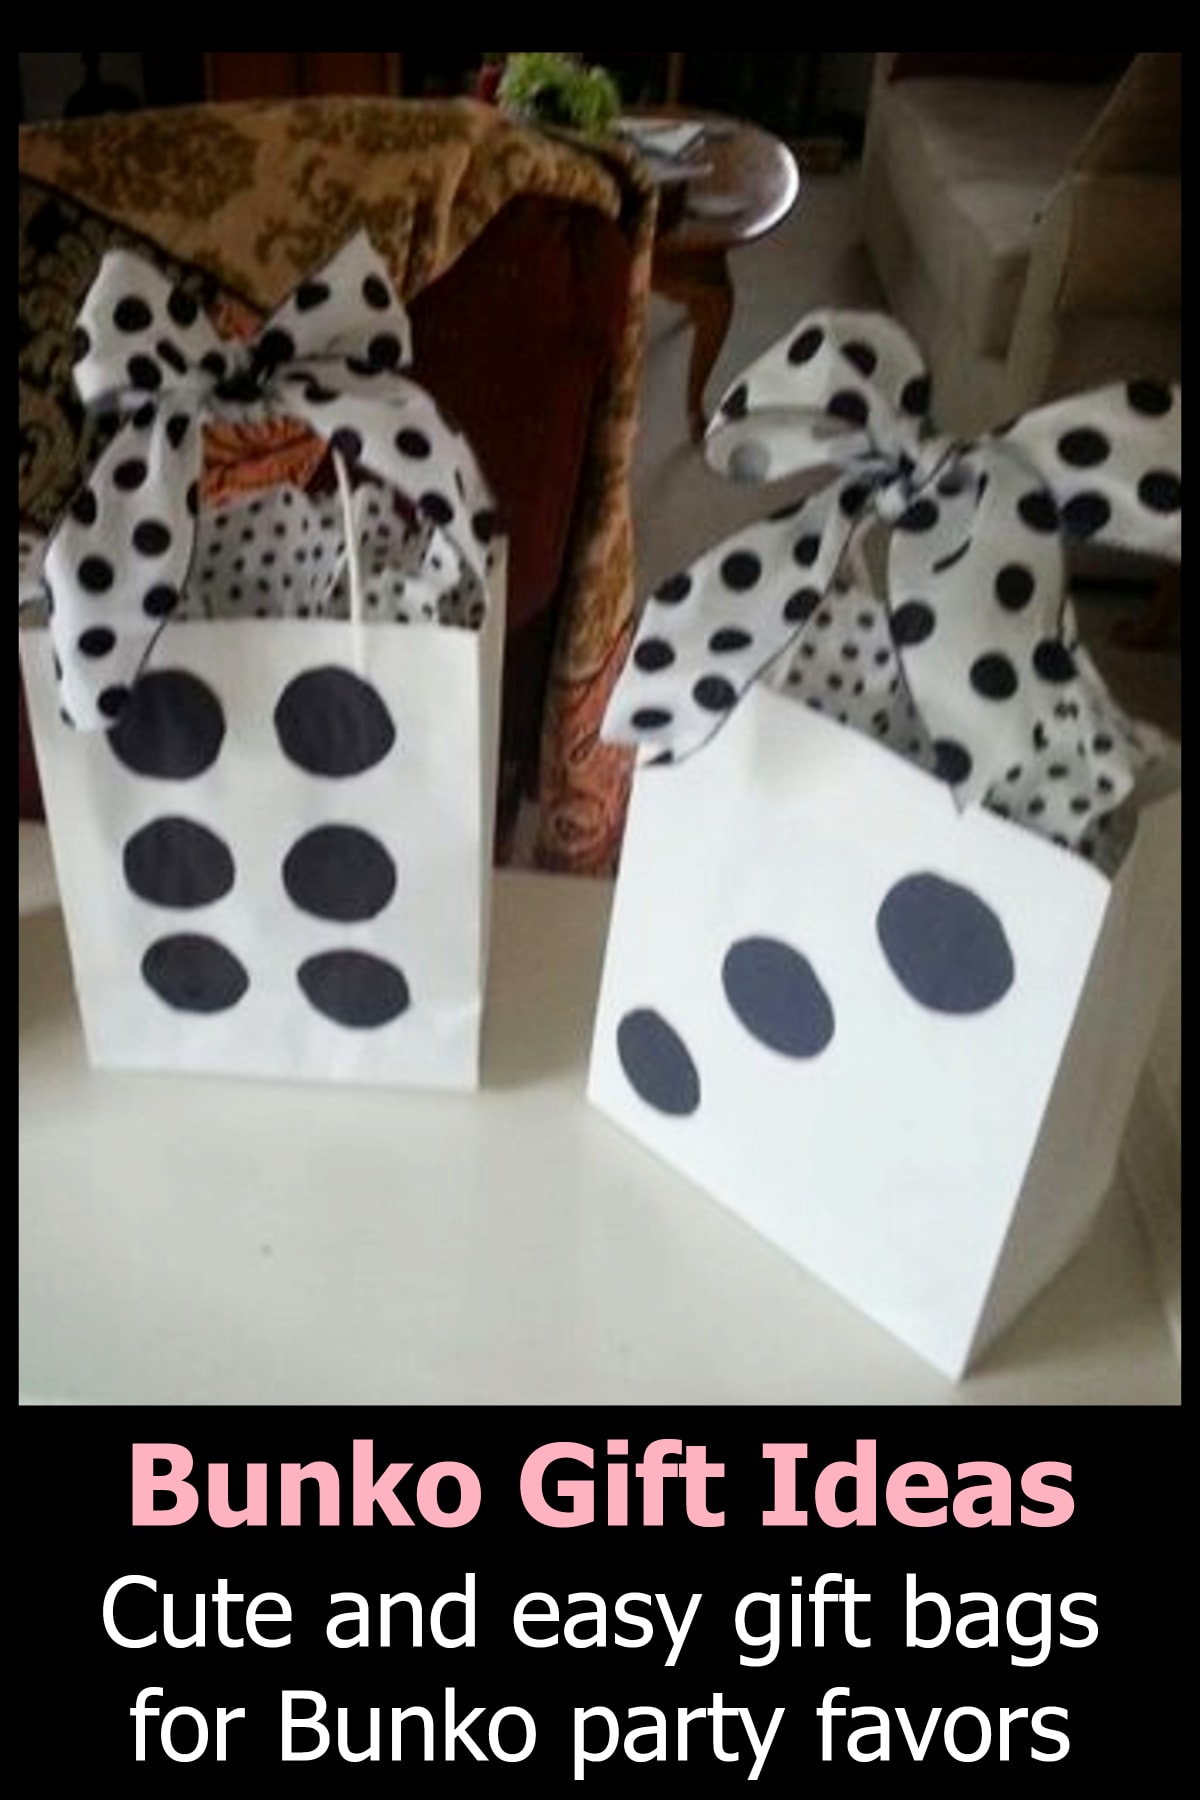 Bunko party favors and gift ideas - cute and easy gift bags and homemade gift baskets for Bunko party favors - perfect for your ladies group too.